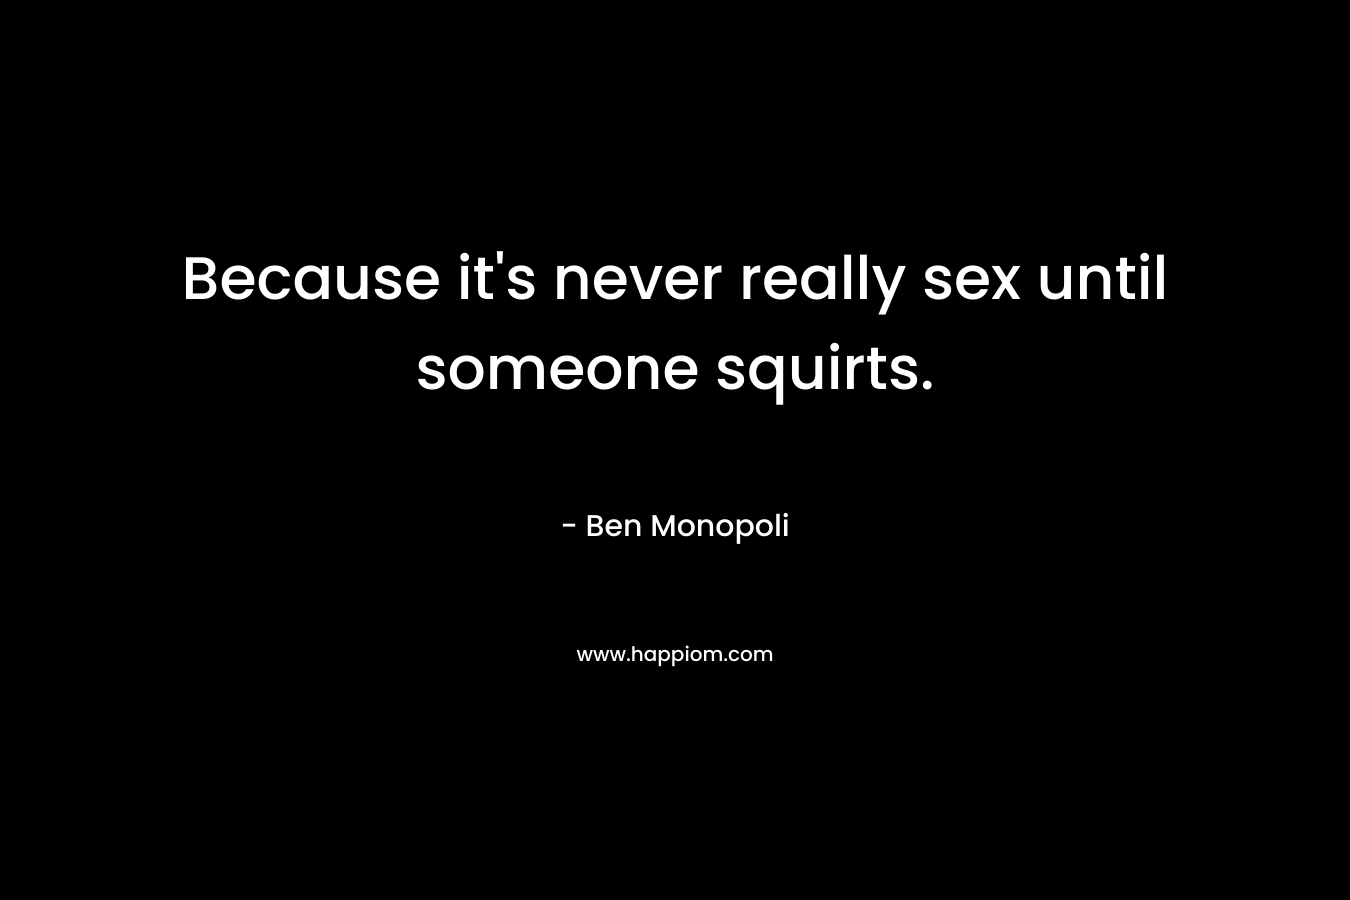 Because it’s never really sex until someone squirts. – Ben Monopoli